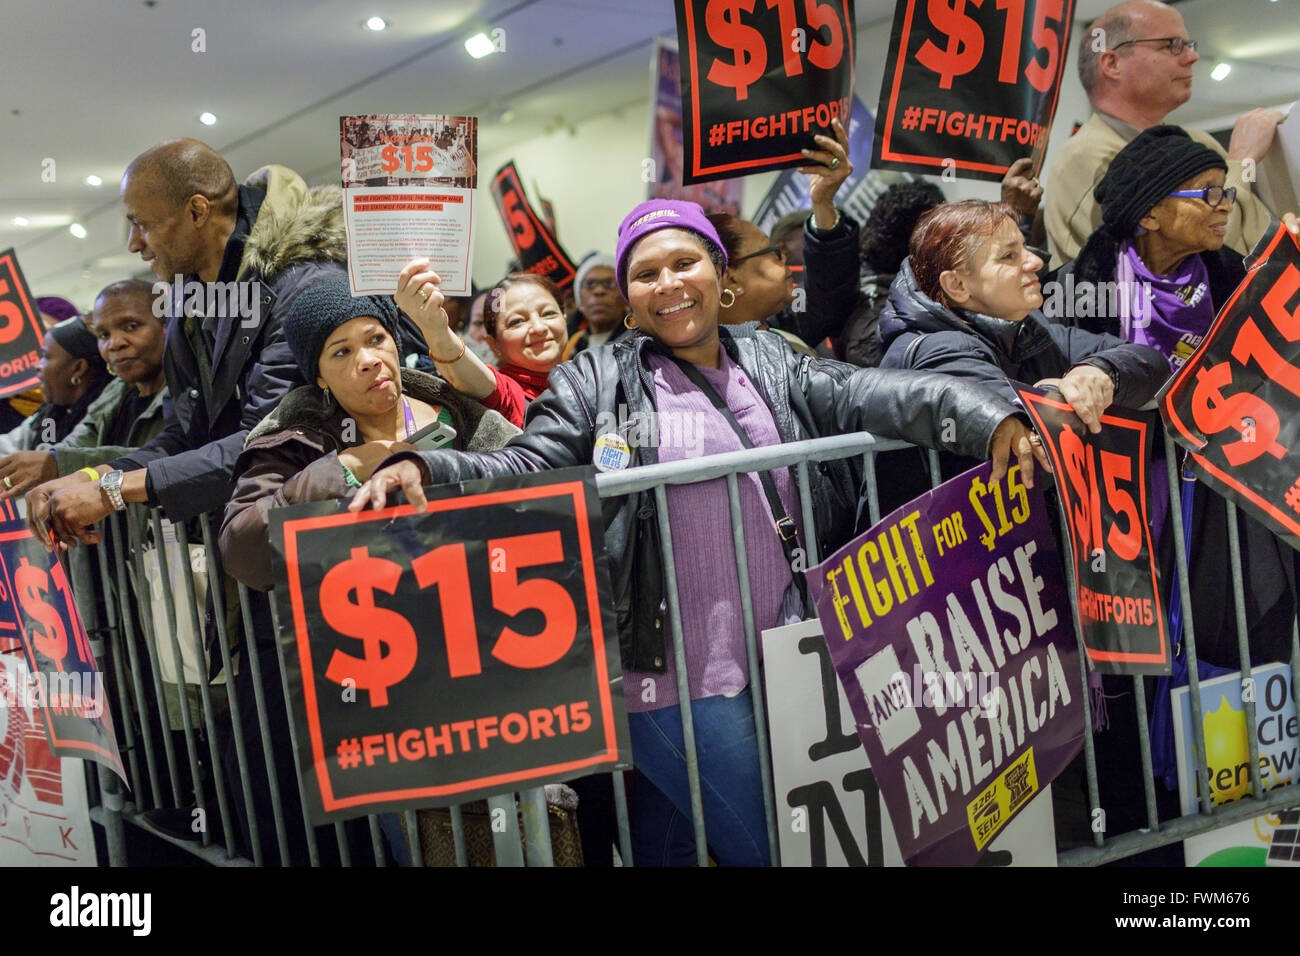 Protest to raise minimum wag to $15 per hour, Albany, New York, USA, January 2016. Stock Photo